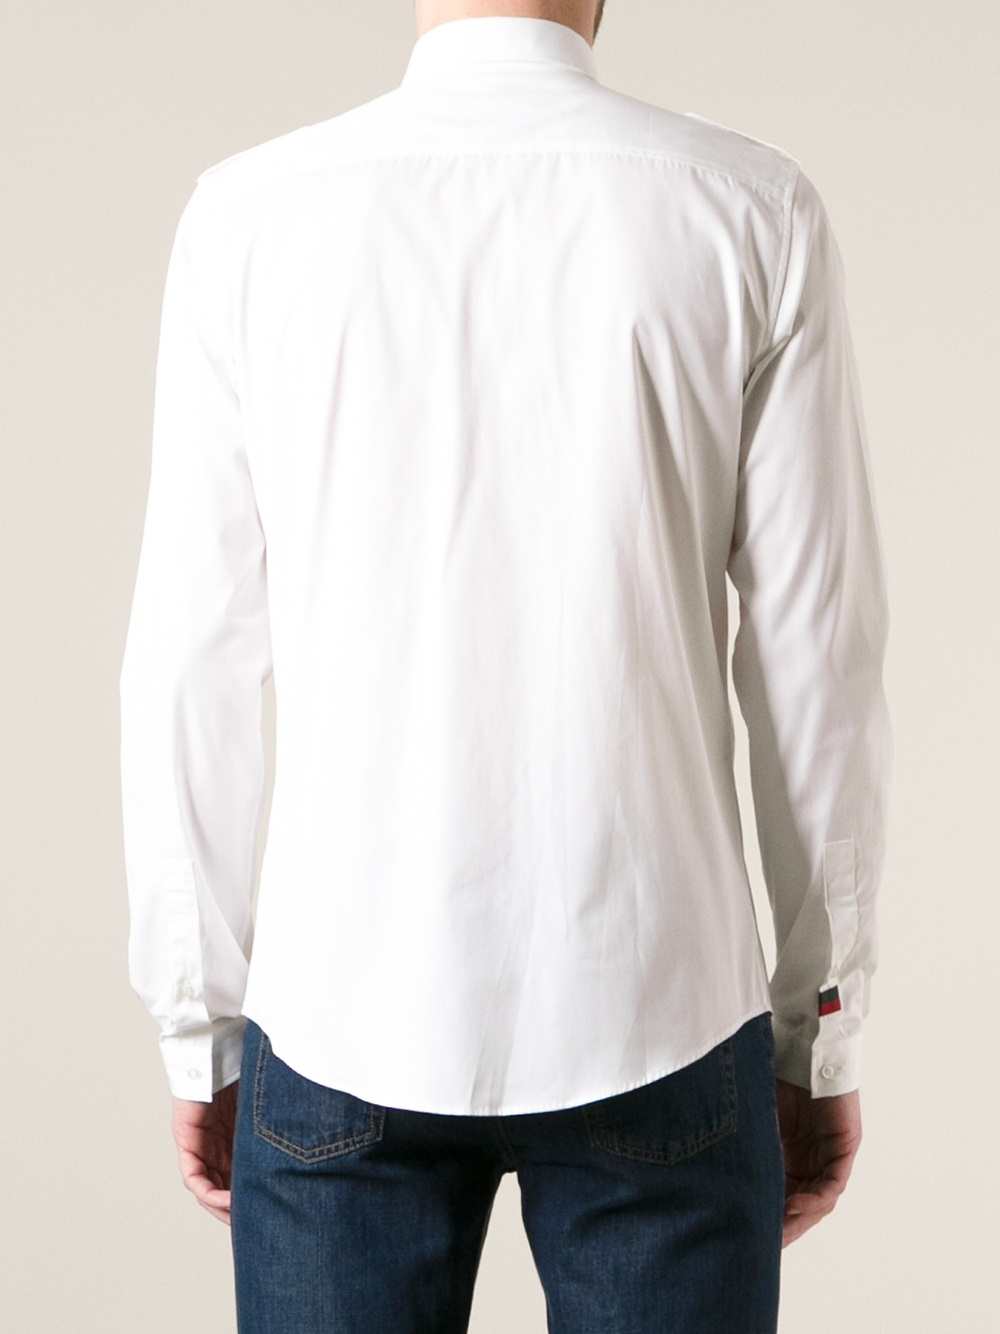 Gucci Button Down Shirt in White for Men - Lyst